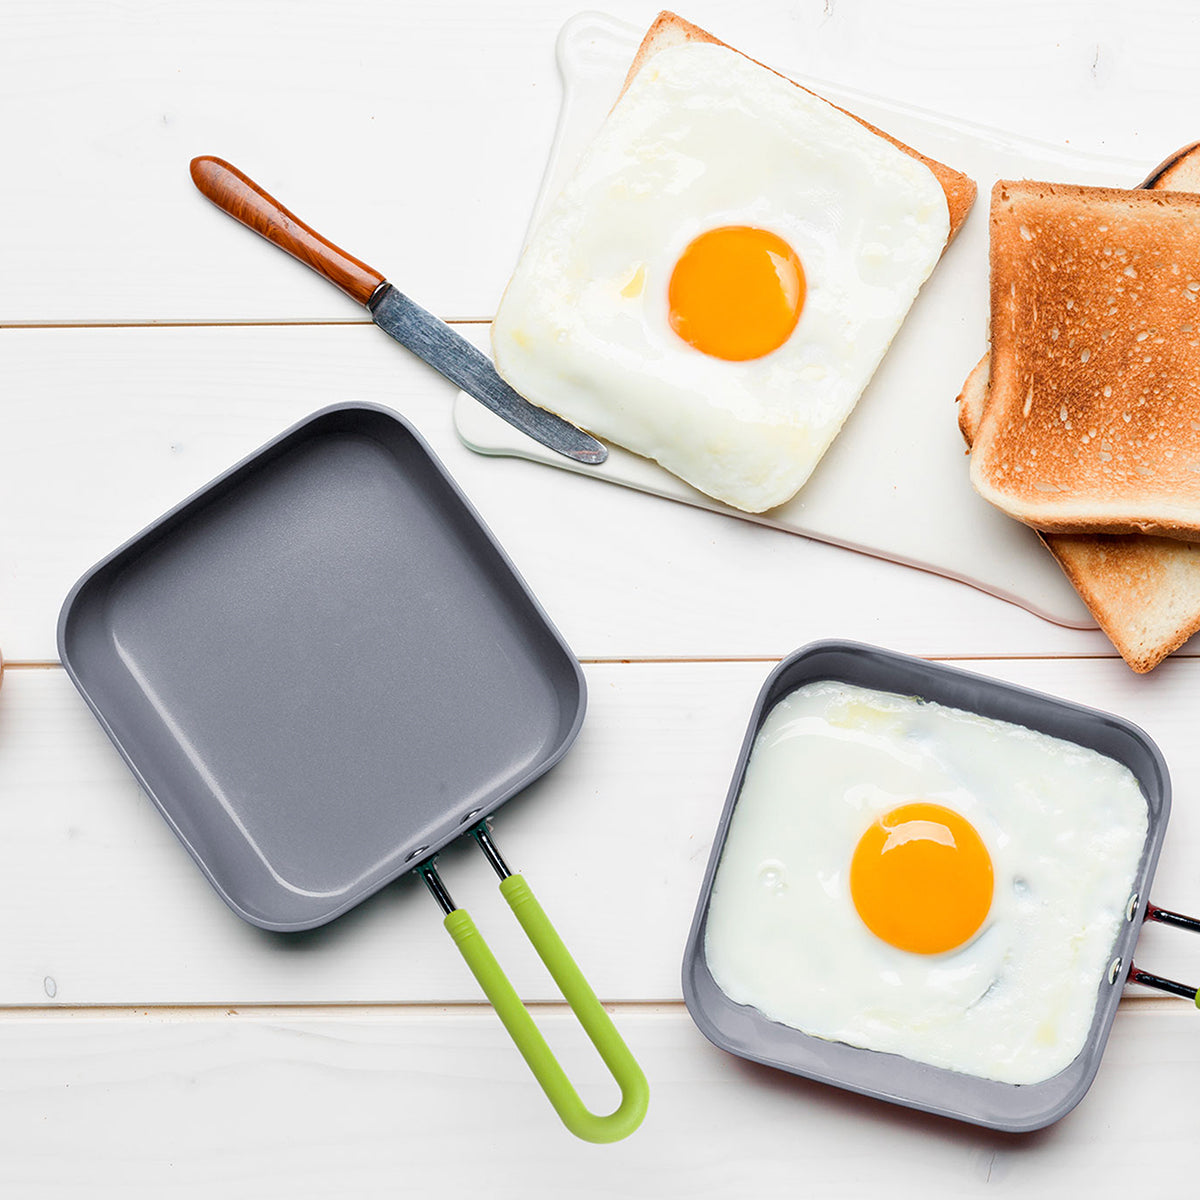 GreenPan Square Egg Expert Frying Pan Review – What's Good To Do